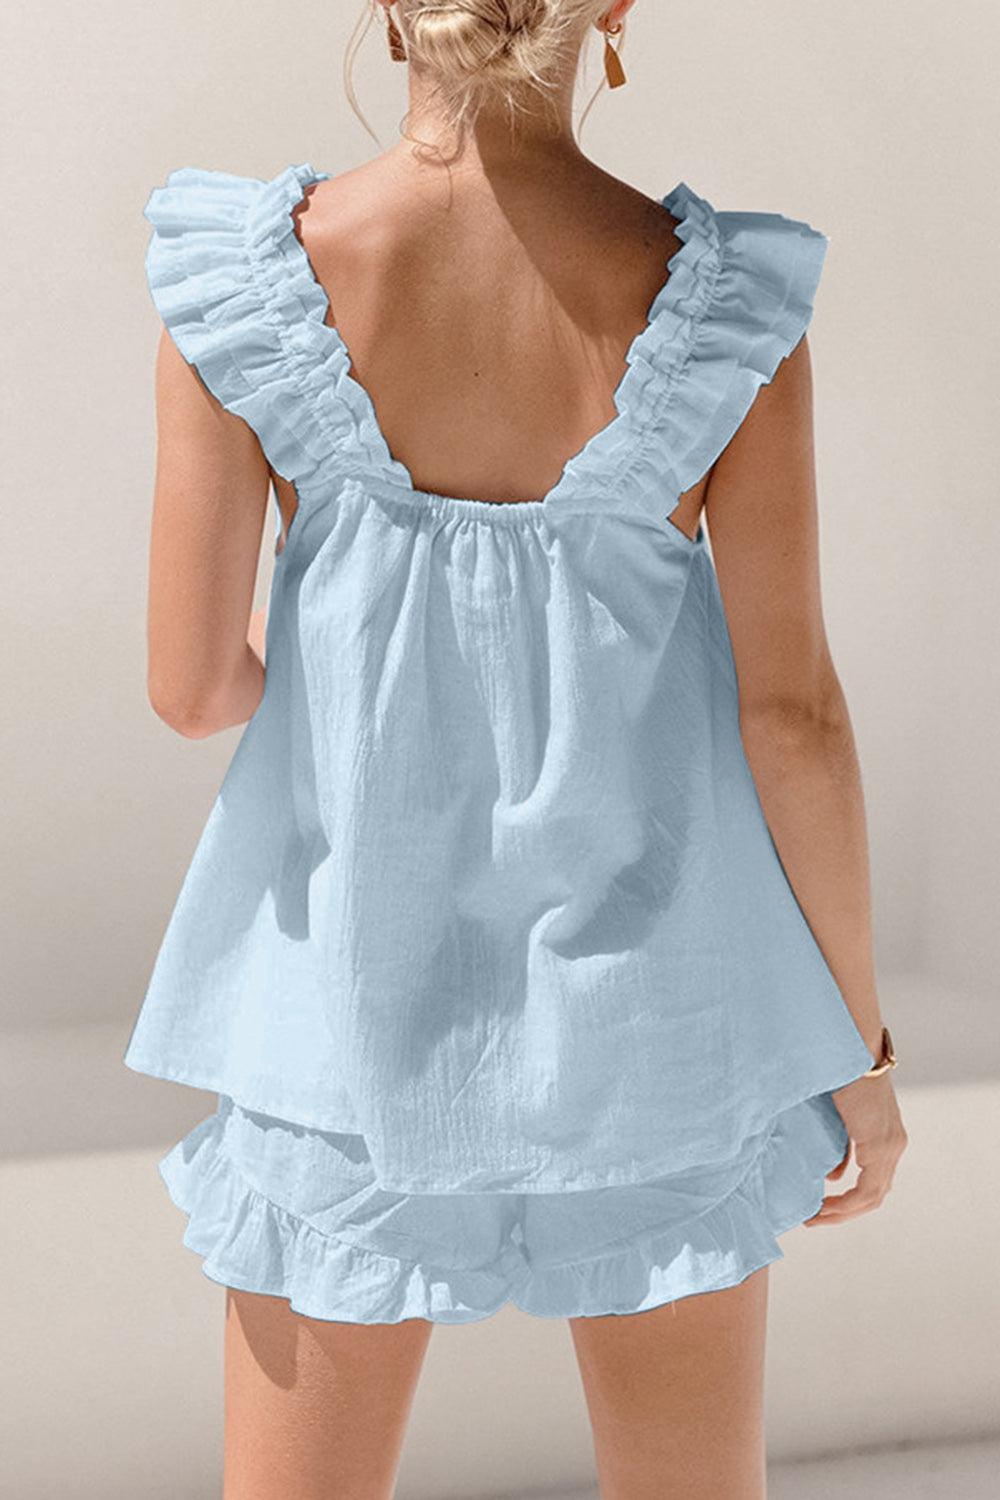 the back of a woman's blue dress with ruffles